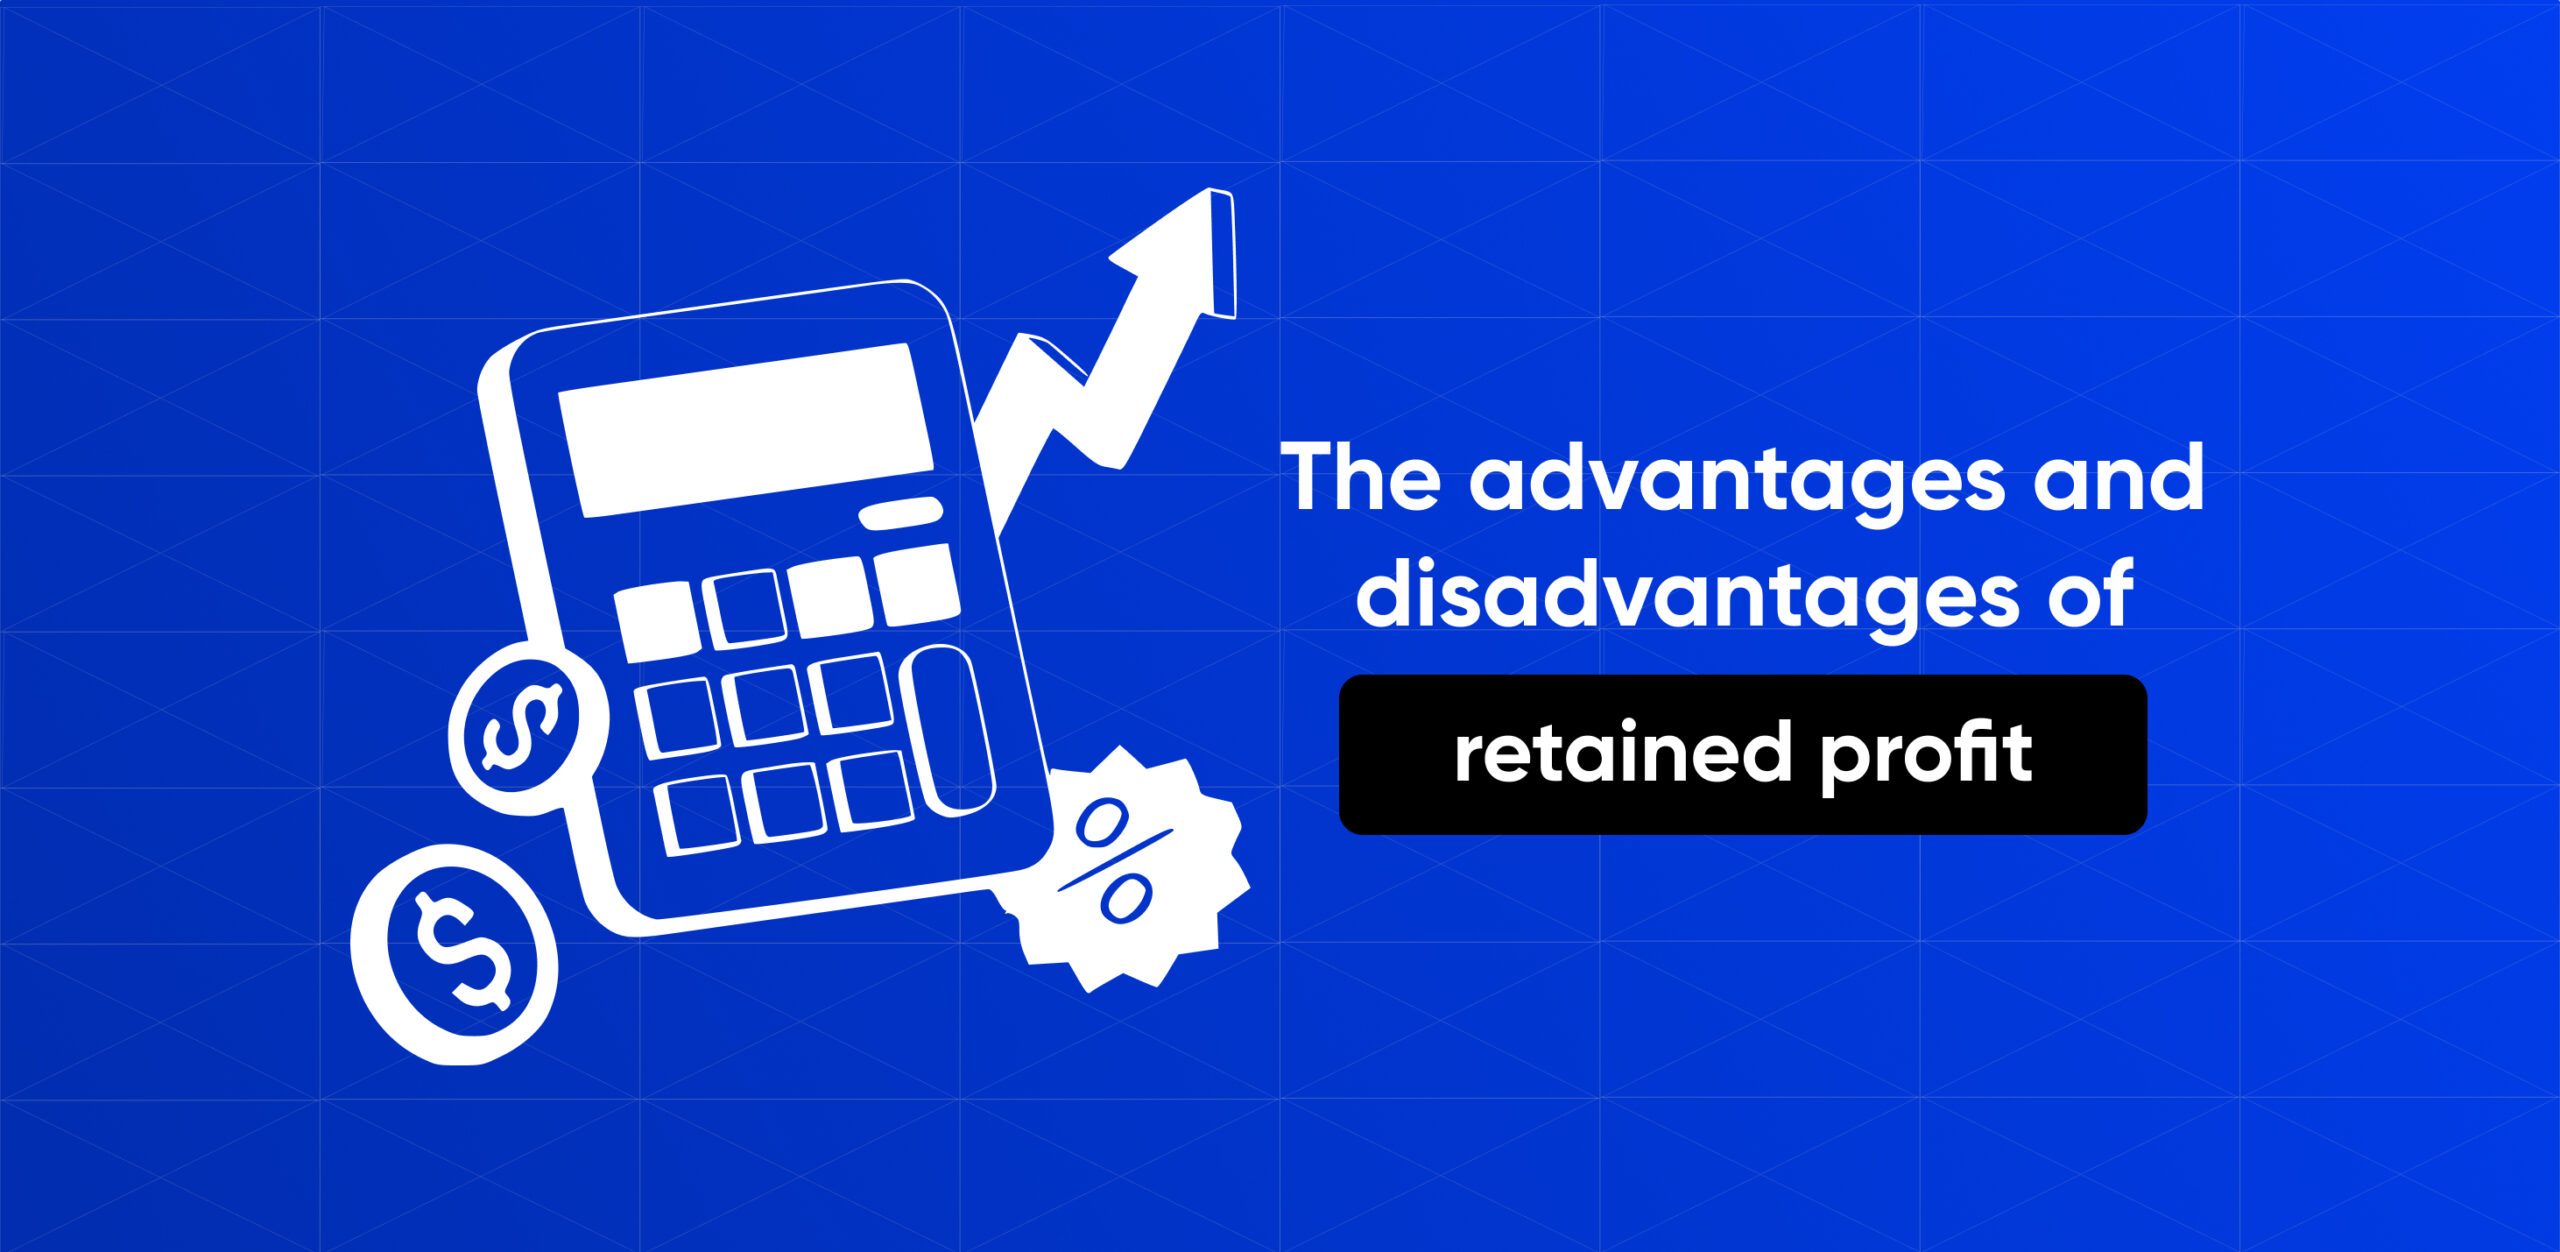 The advantages and disadvantages of retained profit